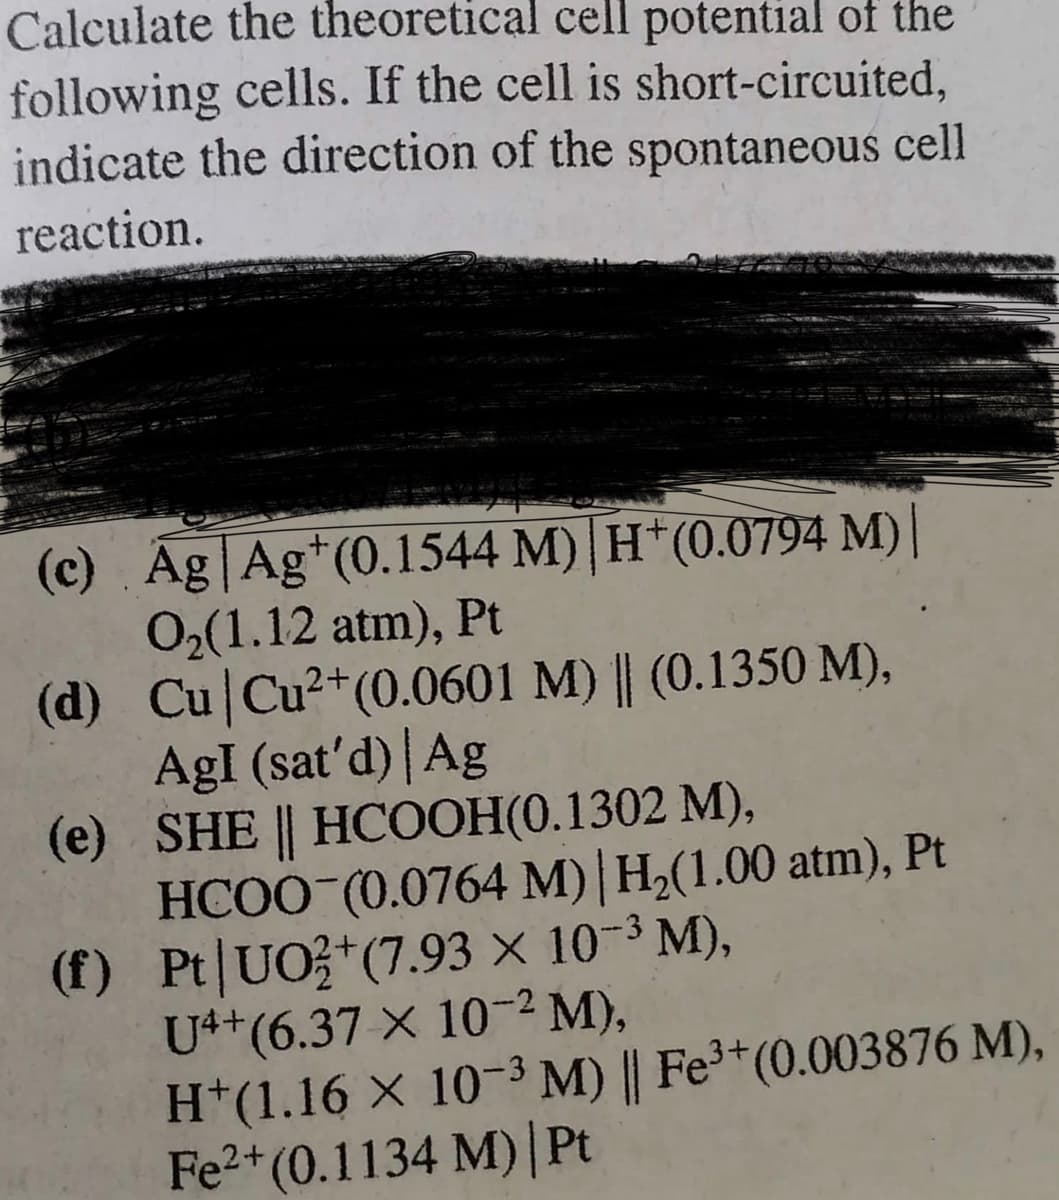 Calculate the theoretical cell potential of the
following cells. If the cell is short-circuited,
indicate the direction of the spontaneous cell
reaction.
(c) Ag Agt (0.1544 M) H*(0.0794 M)|
0₂(1.12 atm), Pt
2+
(d) Cu Cu²+ (0.0601 M) || (0.1350 M),
AgI (sat'd) | Ag
(e)
SHE || HCOOH(0.1302 M),
HCOO (0.0764 M) | H₂(1.00 atm), Pt
(f) Pt UO2+(7.93 × 10-³ M),
U4+ (6.37 x 10-2 M),
H+(1.16 × 10-3 M) || Fe³+ (0.003876 M),
Fe²+ (0.1134 M) | Pt